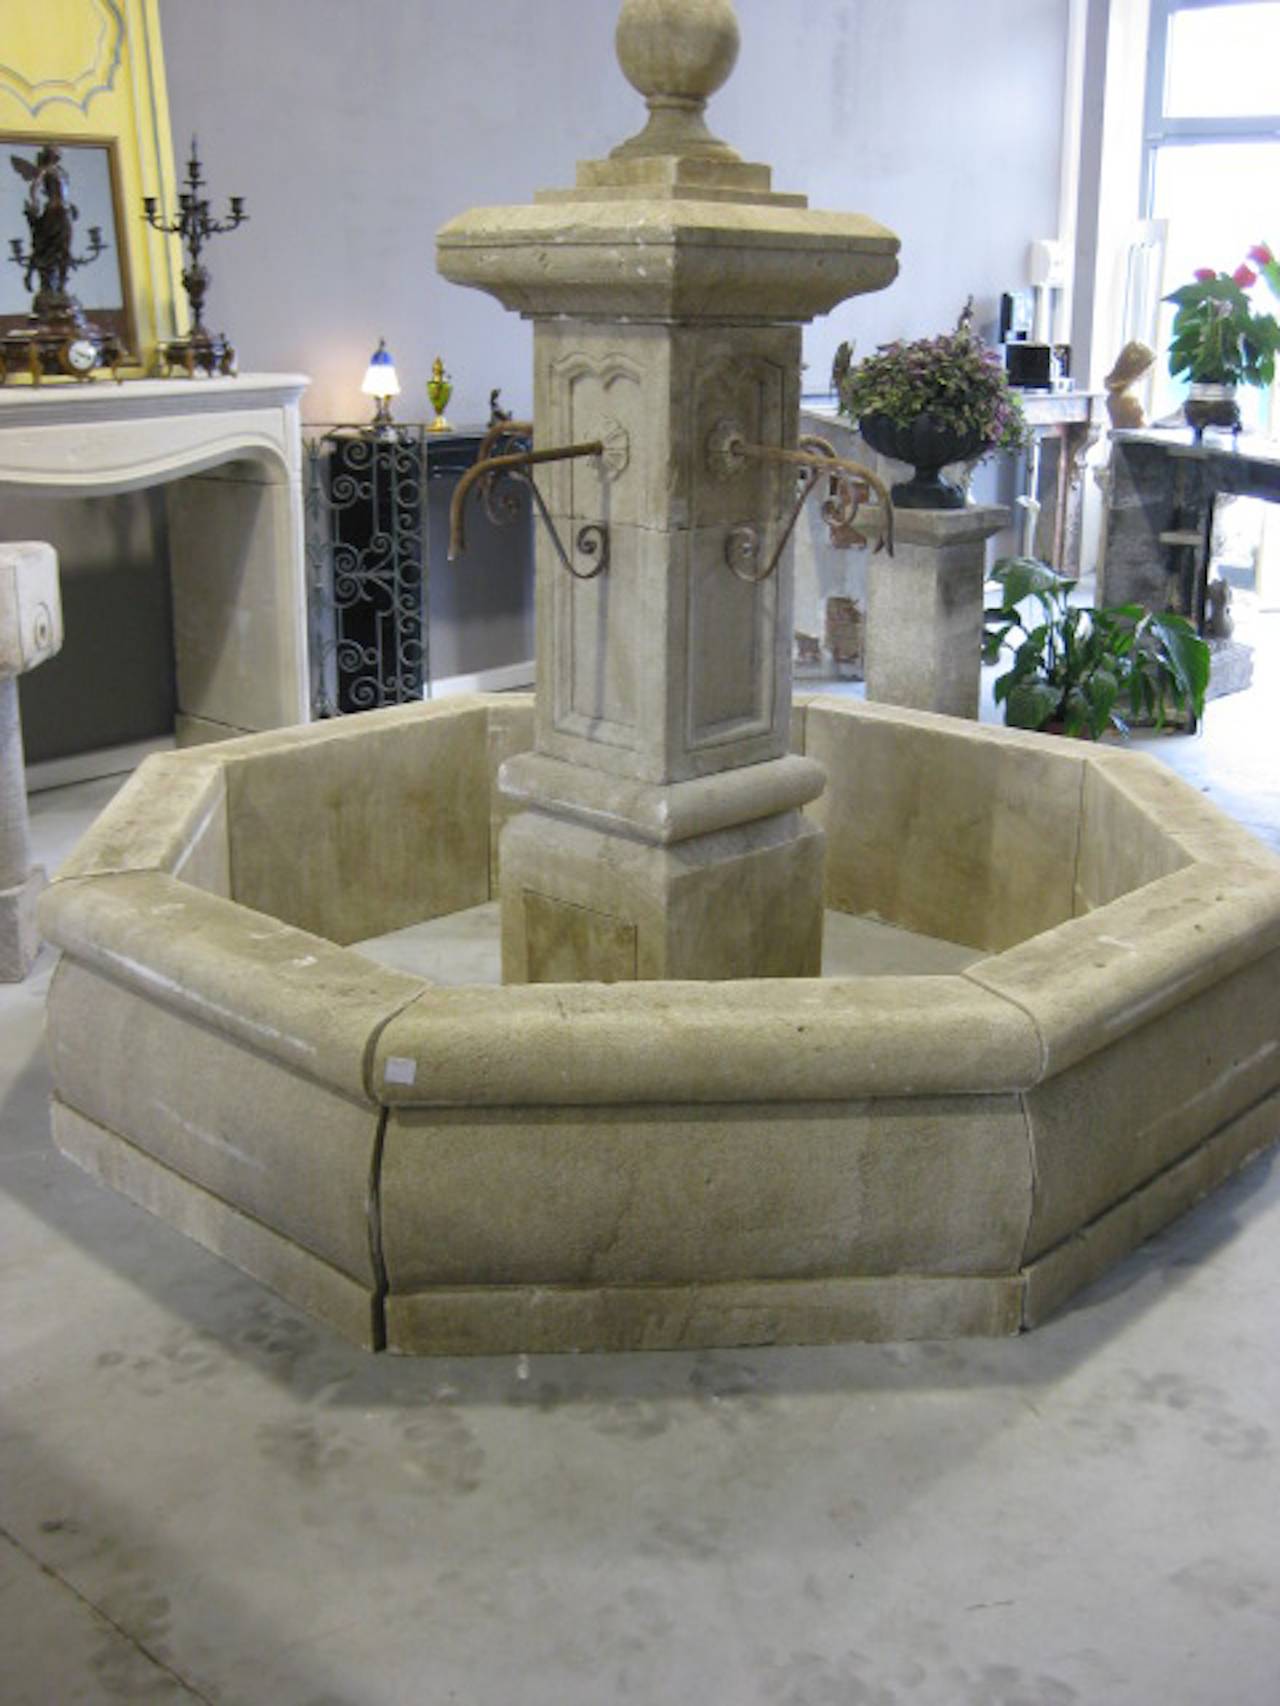 20th Century French Louis XIV Style Fountain Handcrafted in Limestone, Provence, France